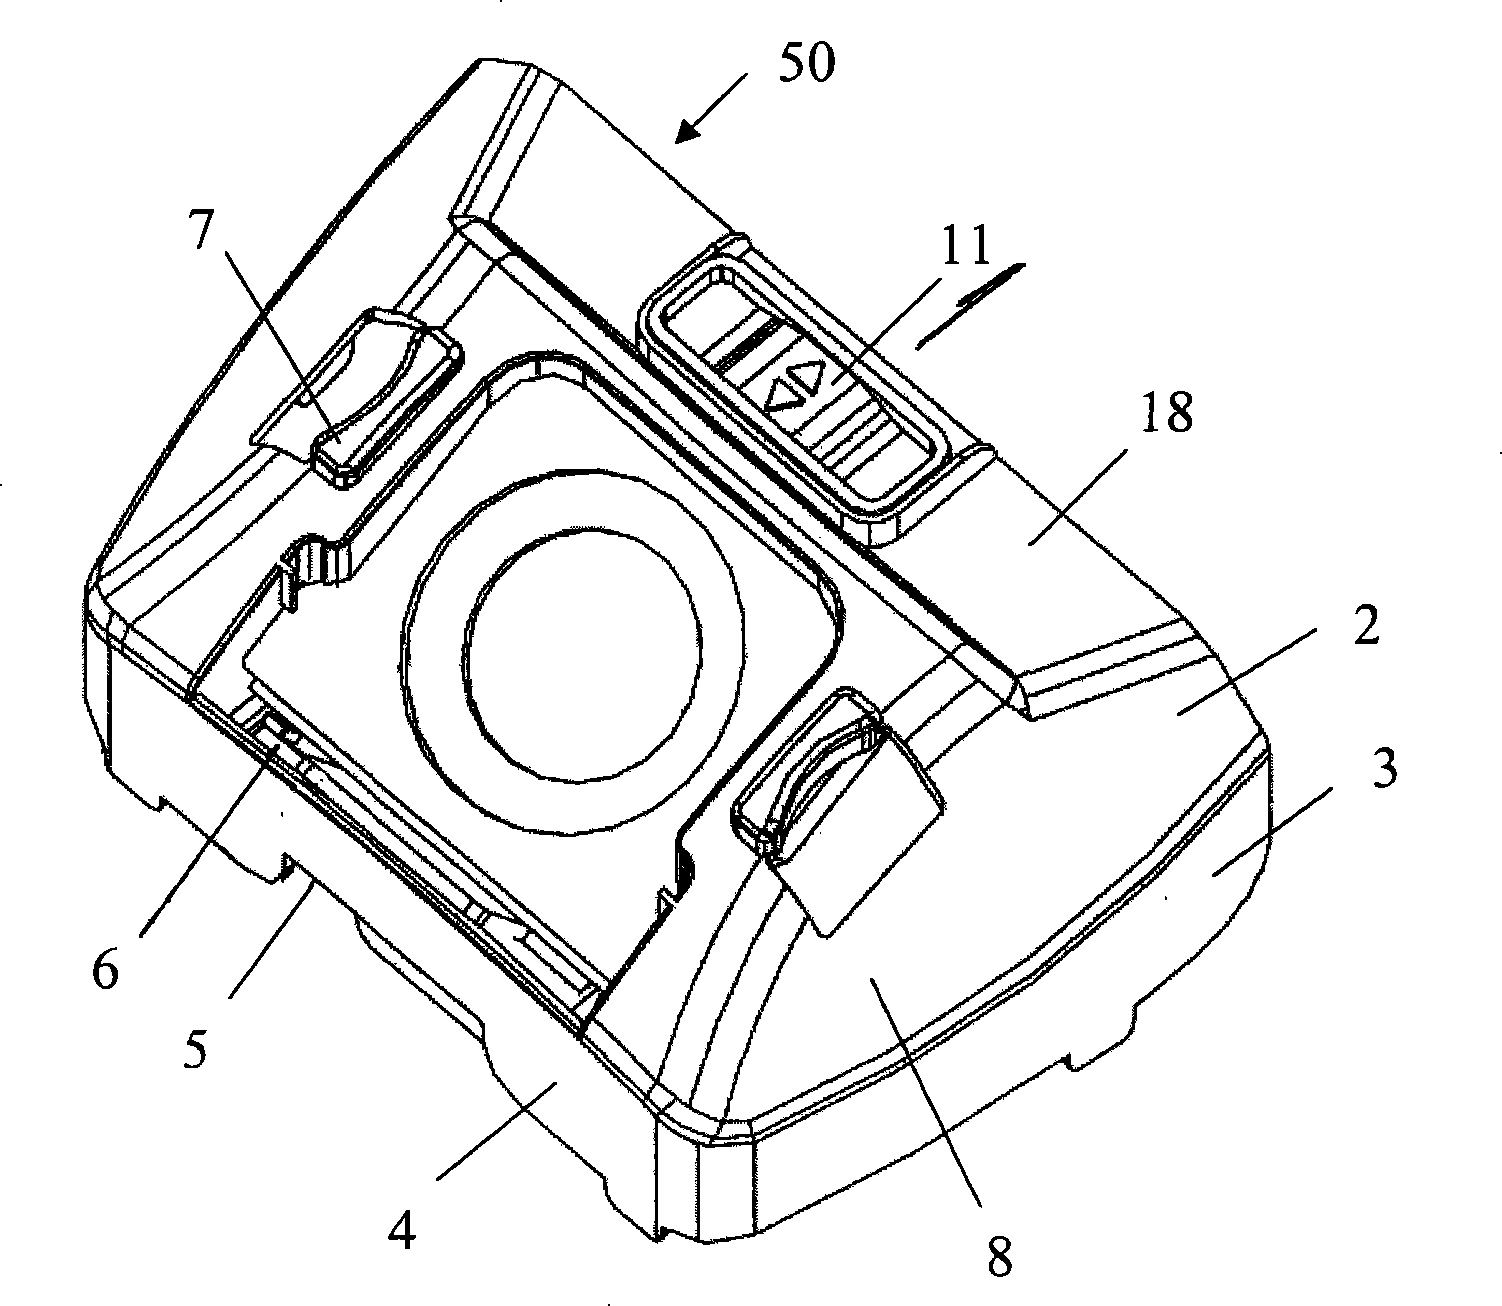 Cloth bag frame with dust collecting bag capable of being popped automatically